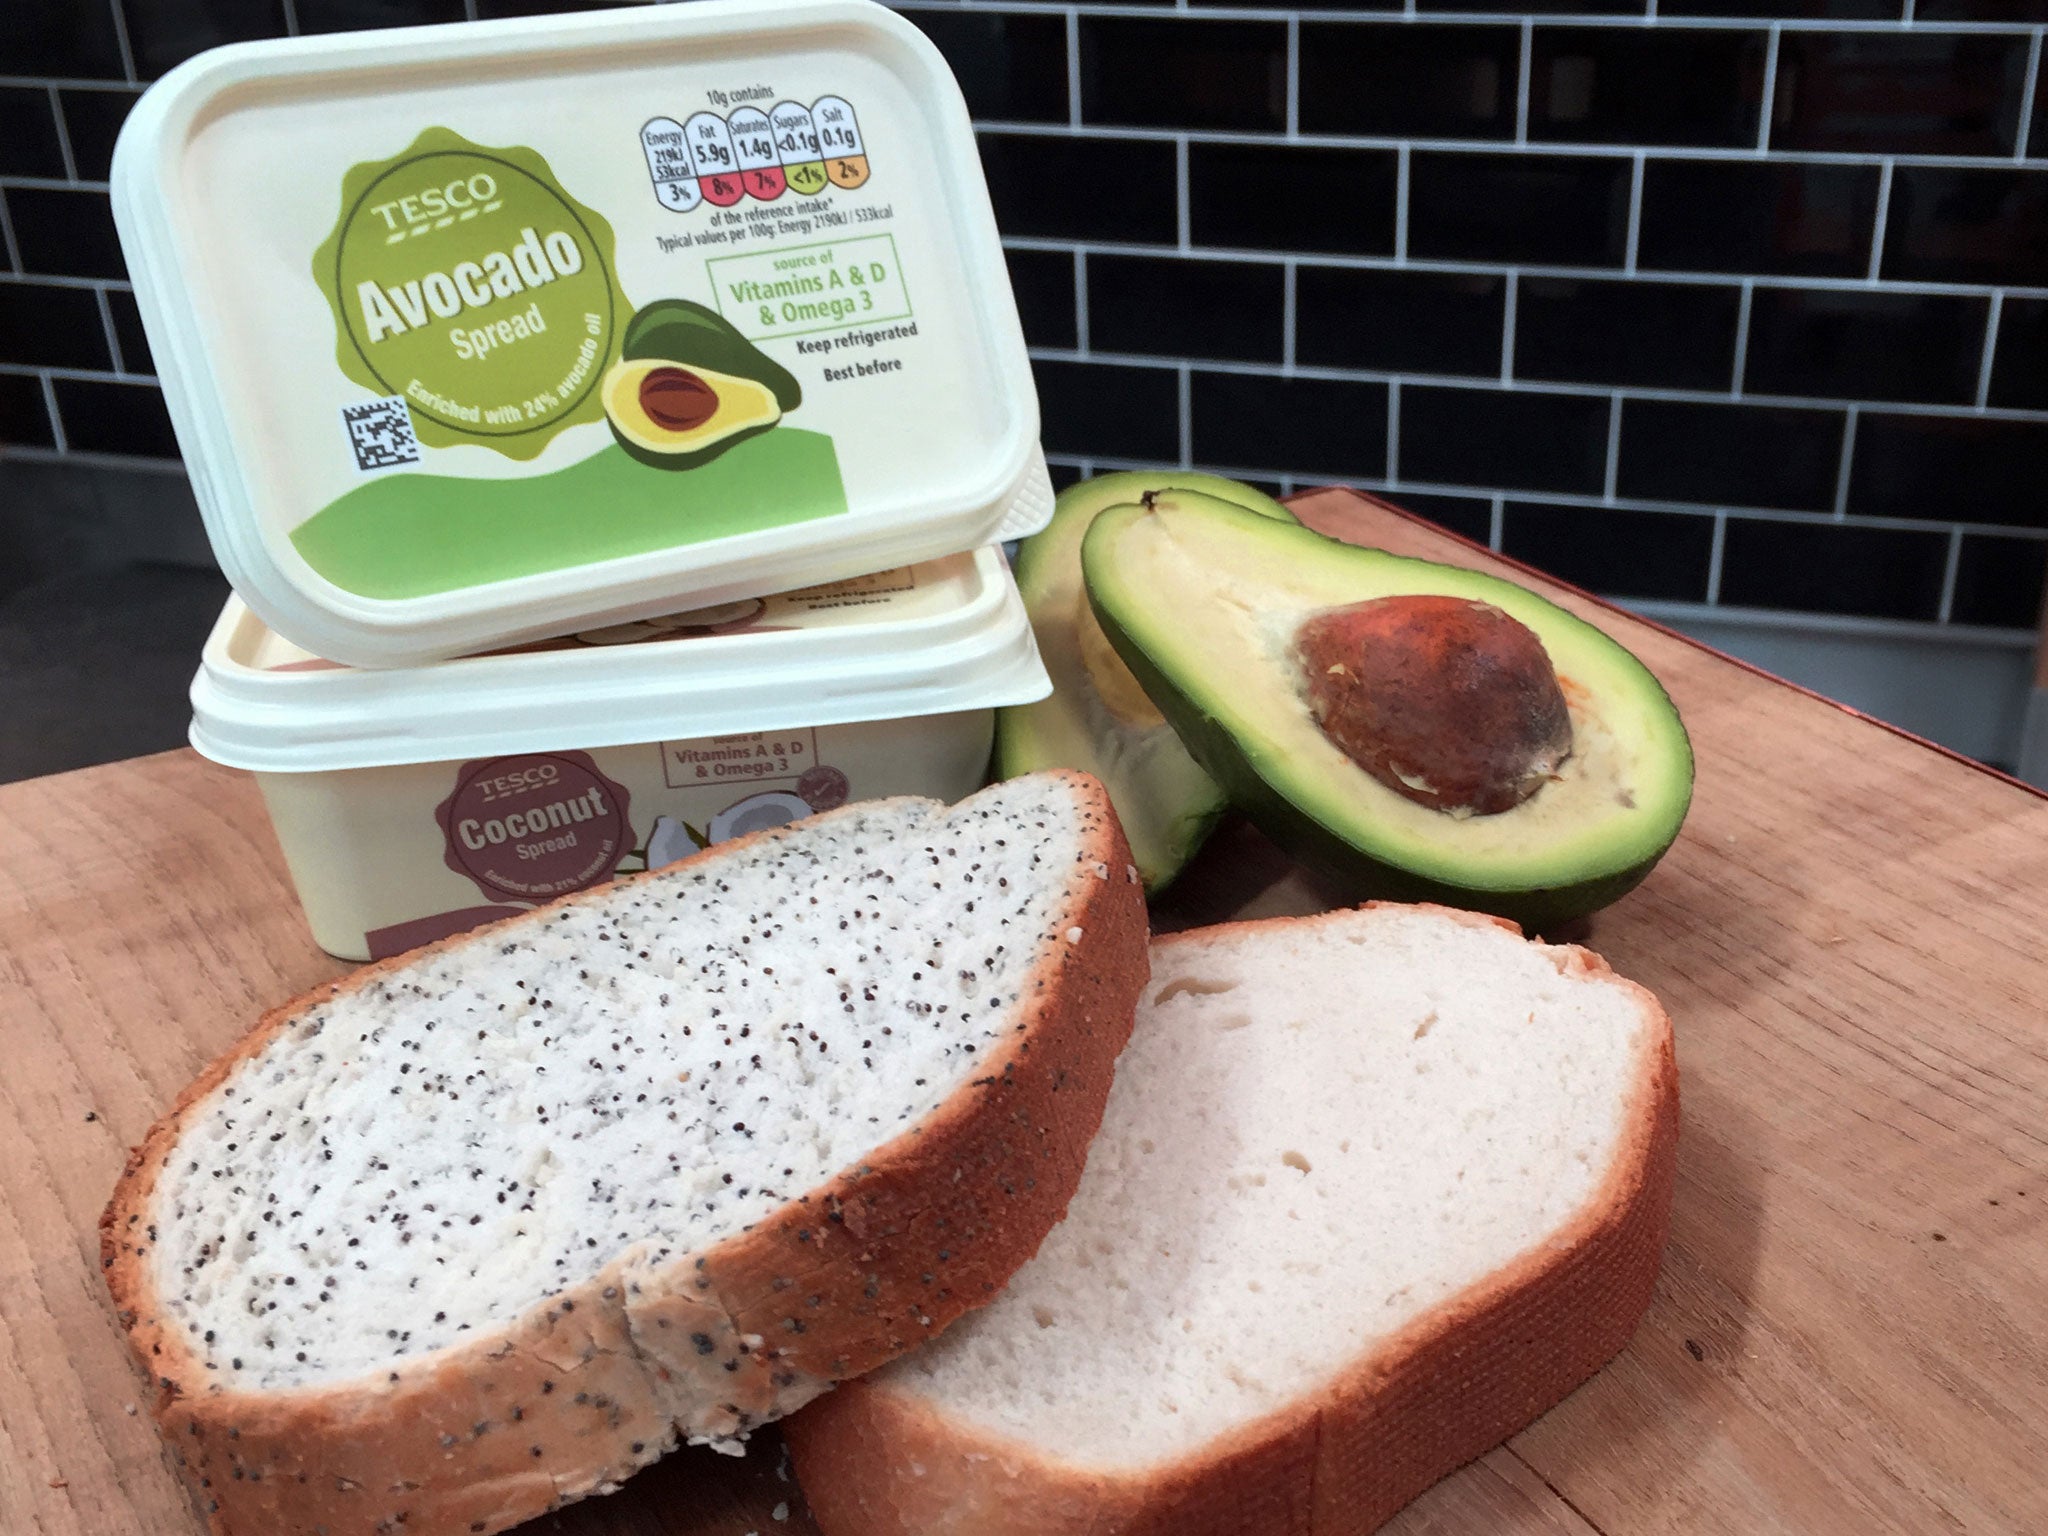 Tesco claims the product, based on ripe frozen avocados, contains less saturated fat, calories and salt when compared to butter